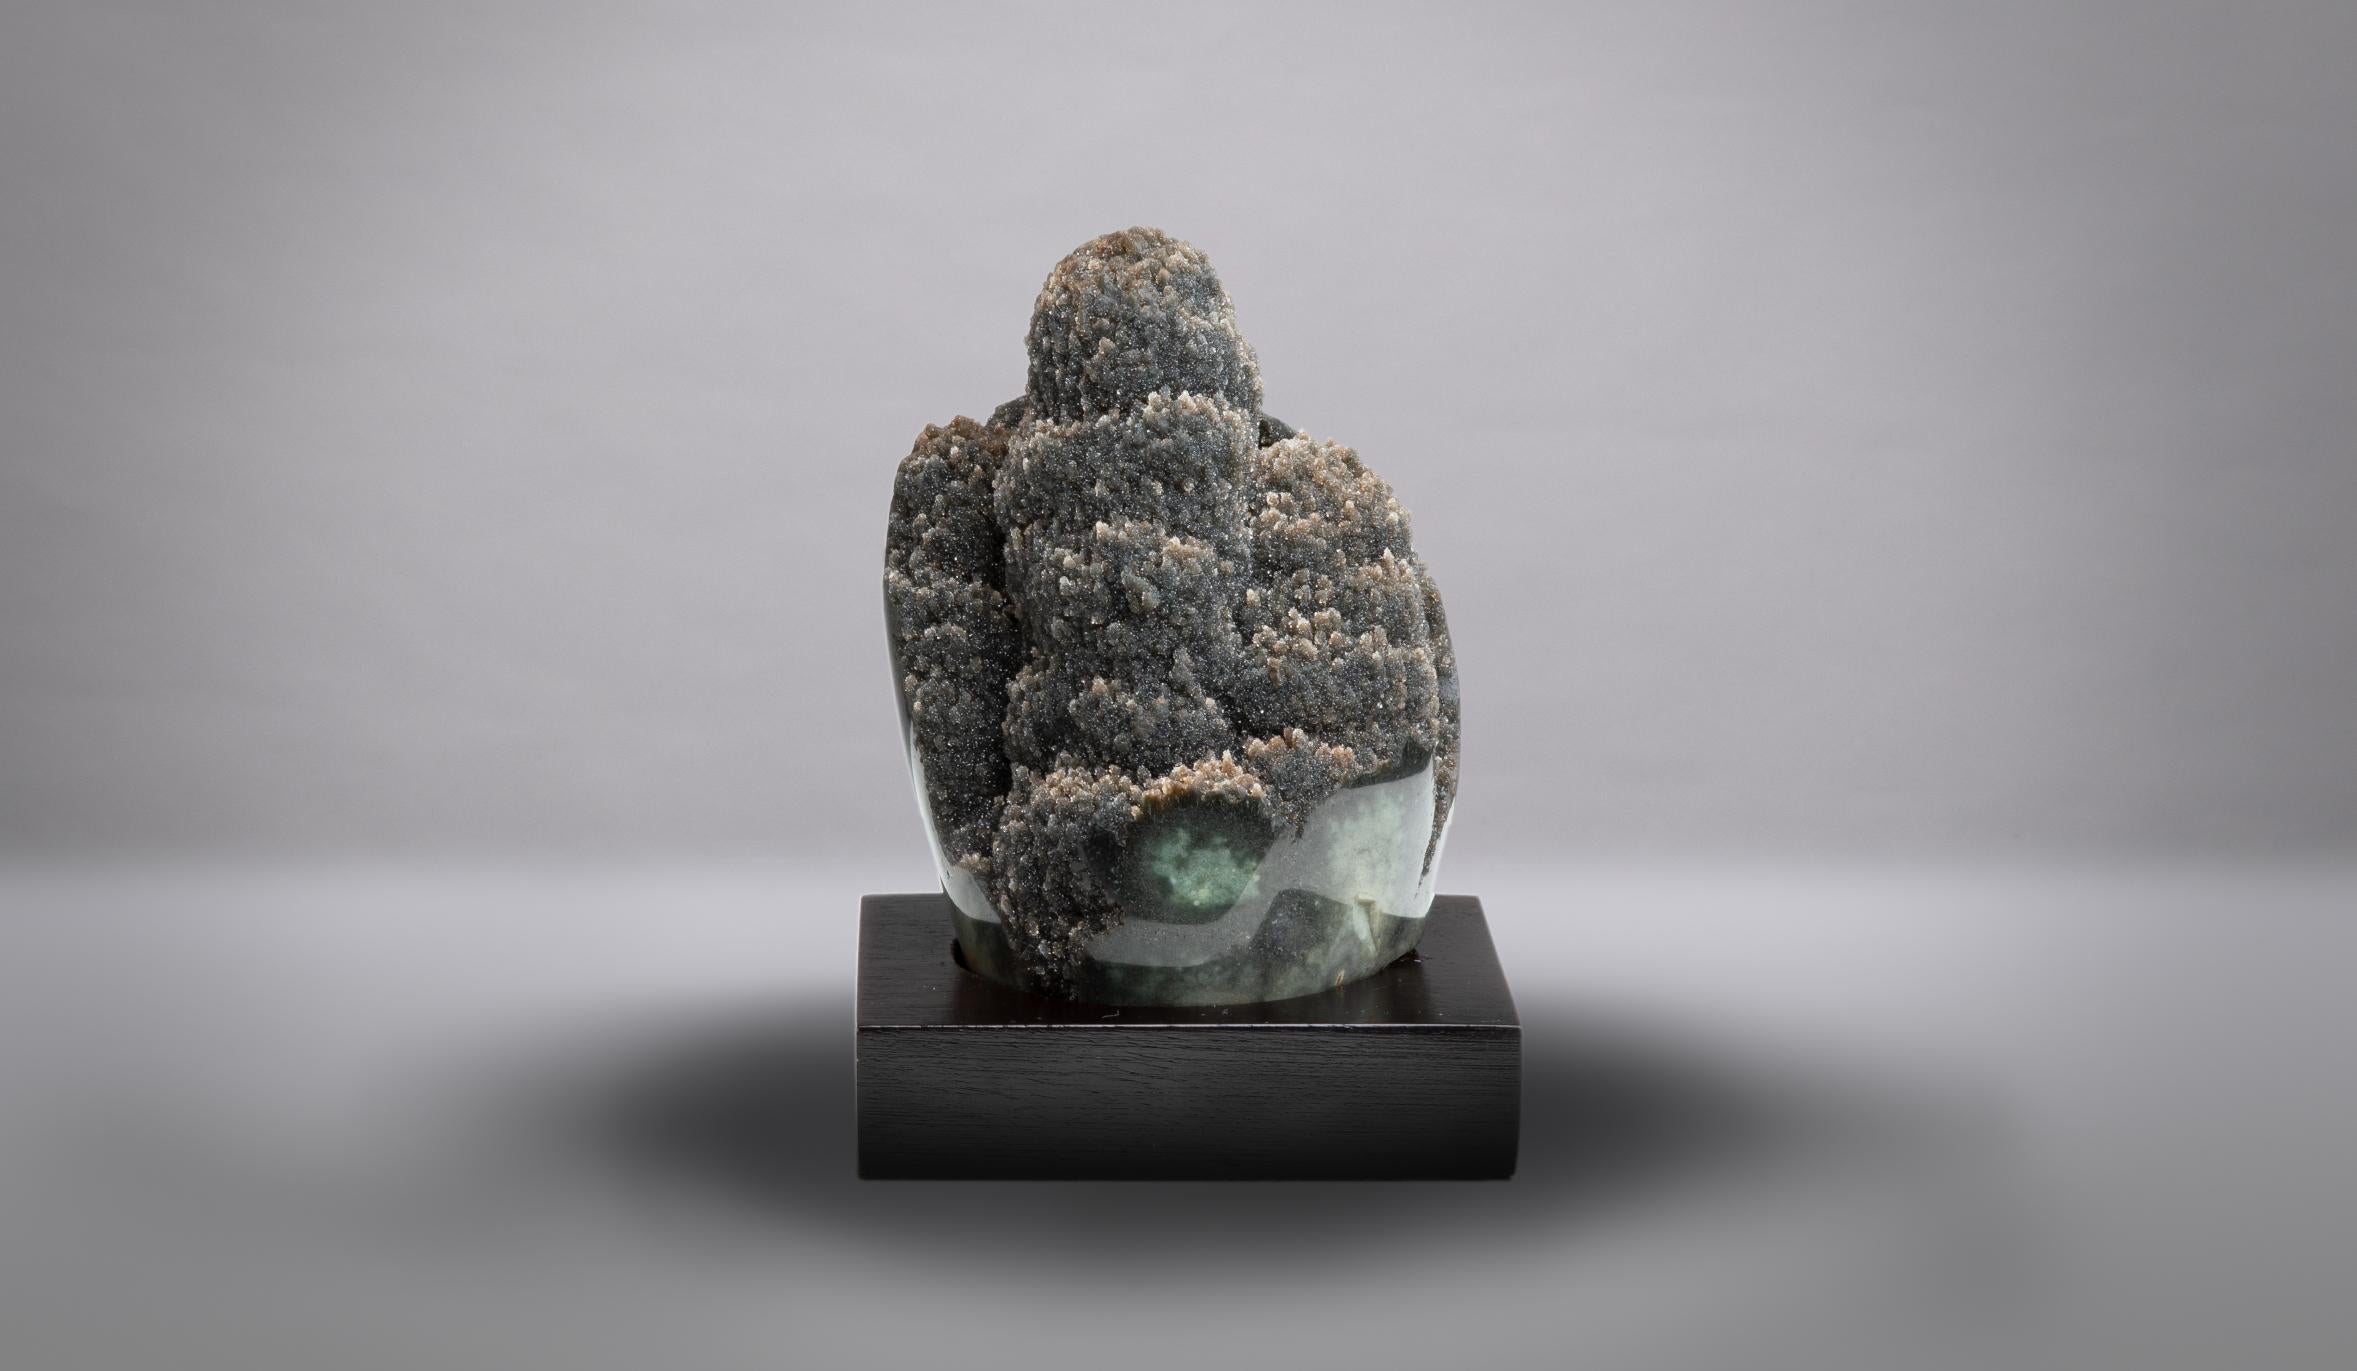 A wonderful display piece showing a prominent thick stalactite at the centre,
covered with glass-like green-brown druzy quartz. The lower border
polished to reveal a wonderful sea green celadonite “shell” belonging to
the original geode.

This piece